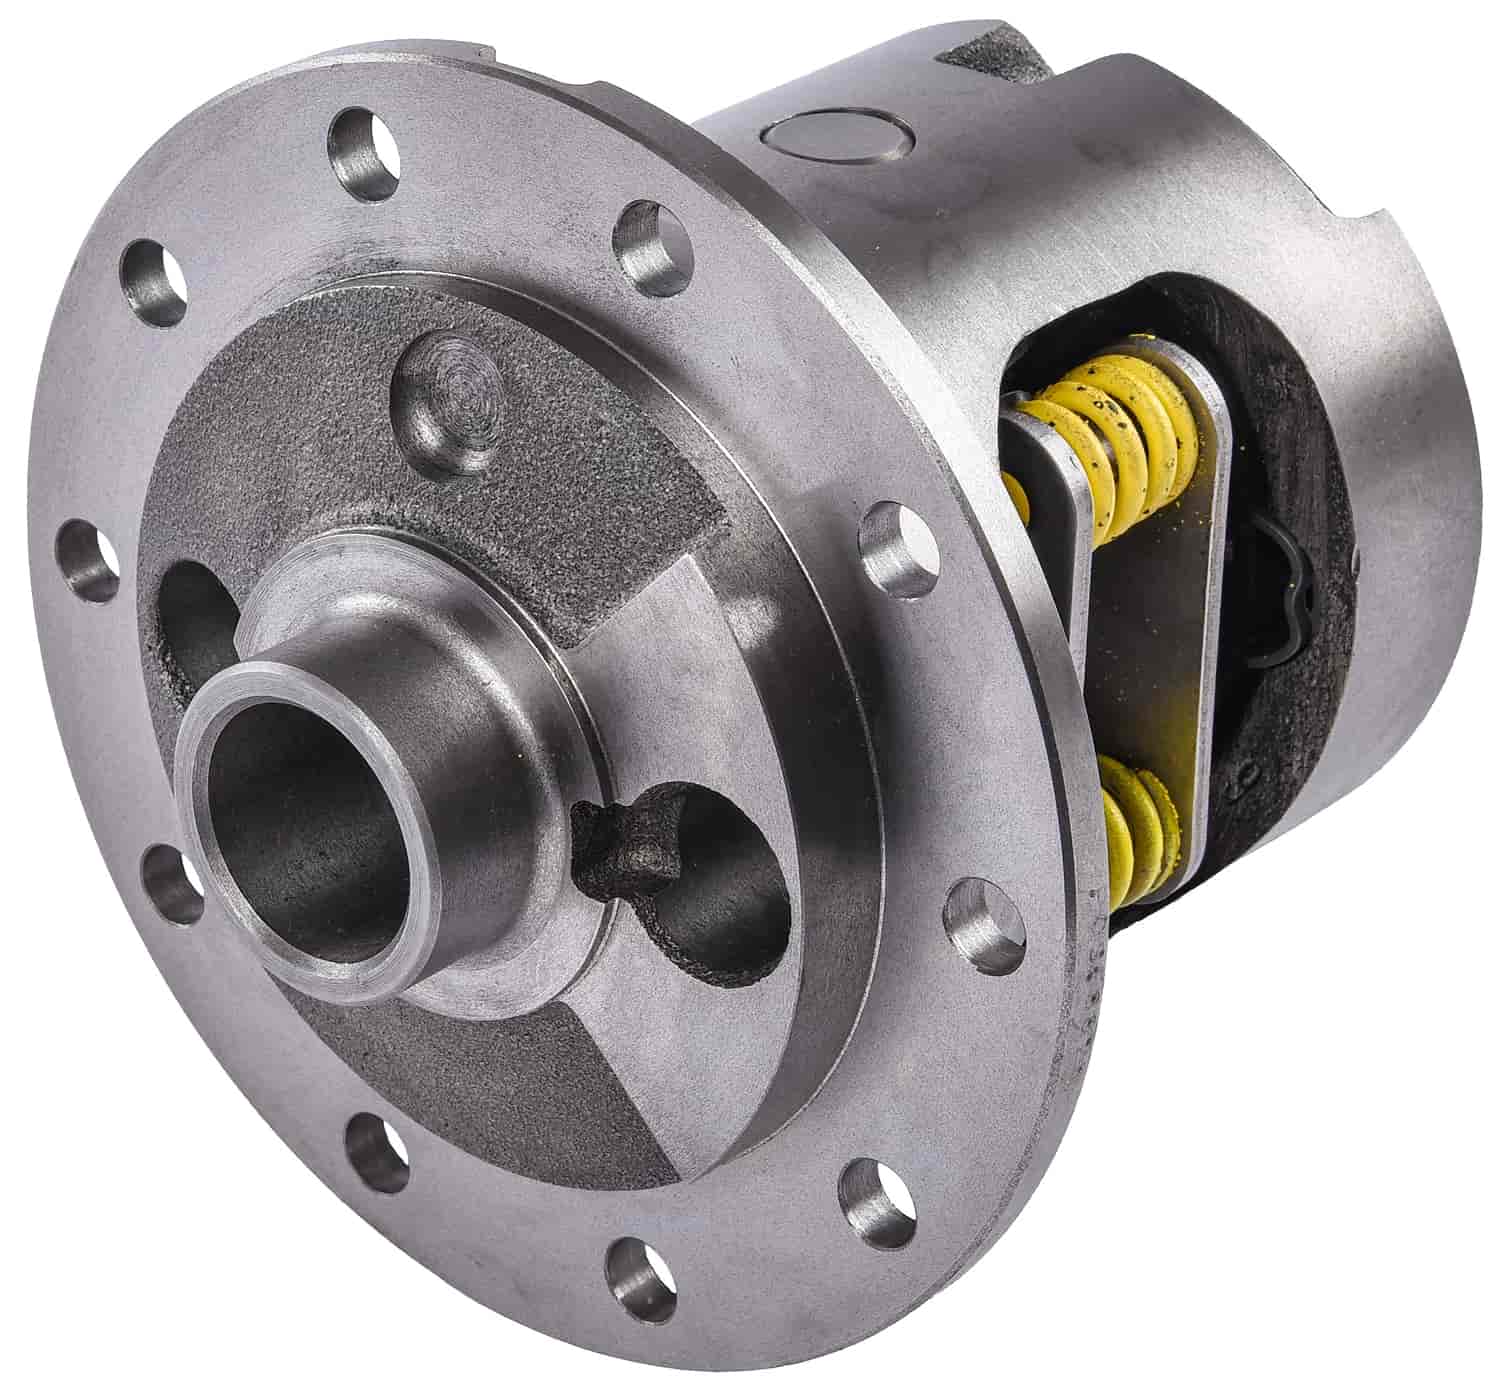 Posi Traction Differential for Ford Cars/Trucks Rear, Ford 8.8" in. 28-Spline [All Ratios]